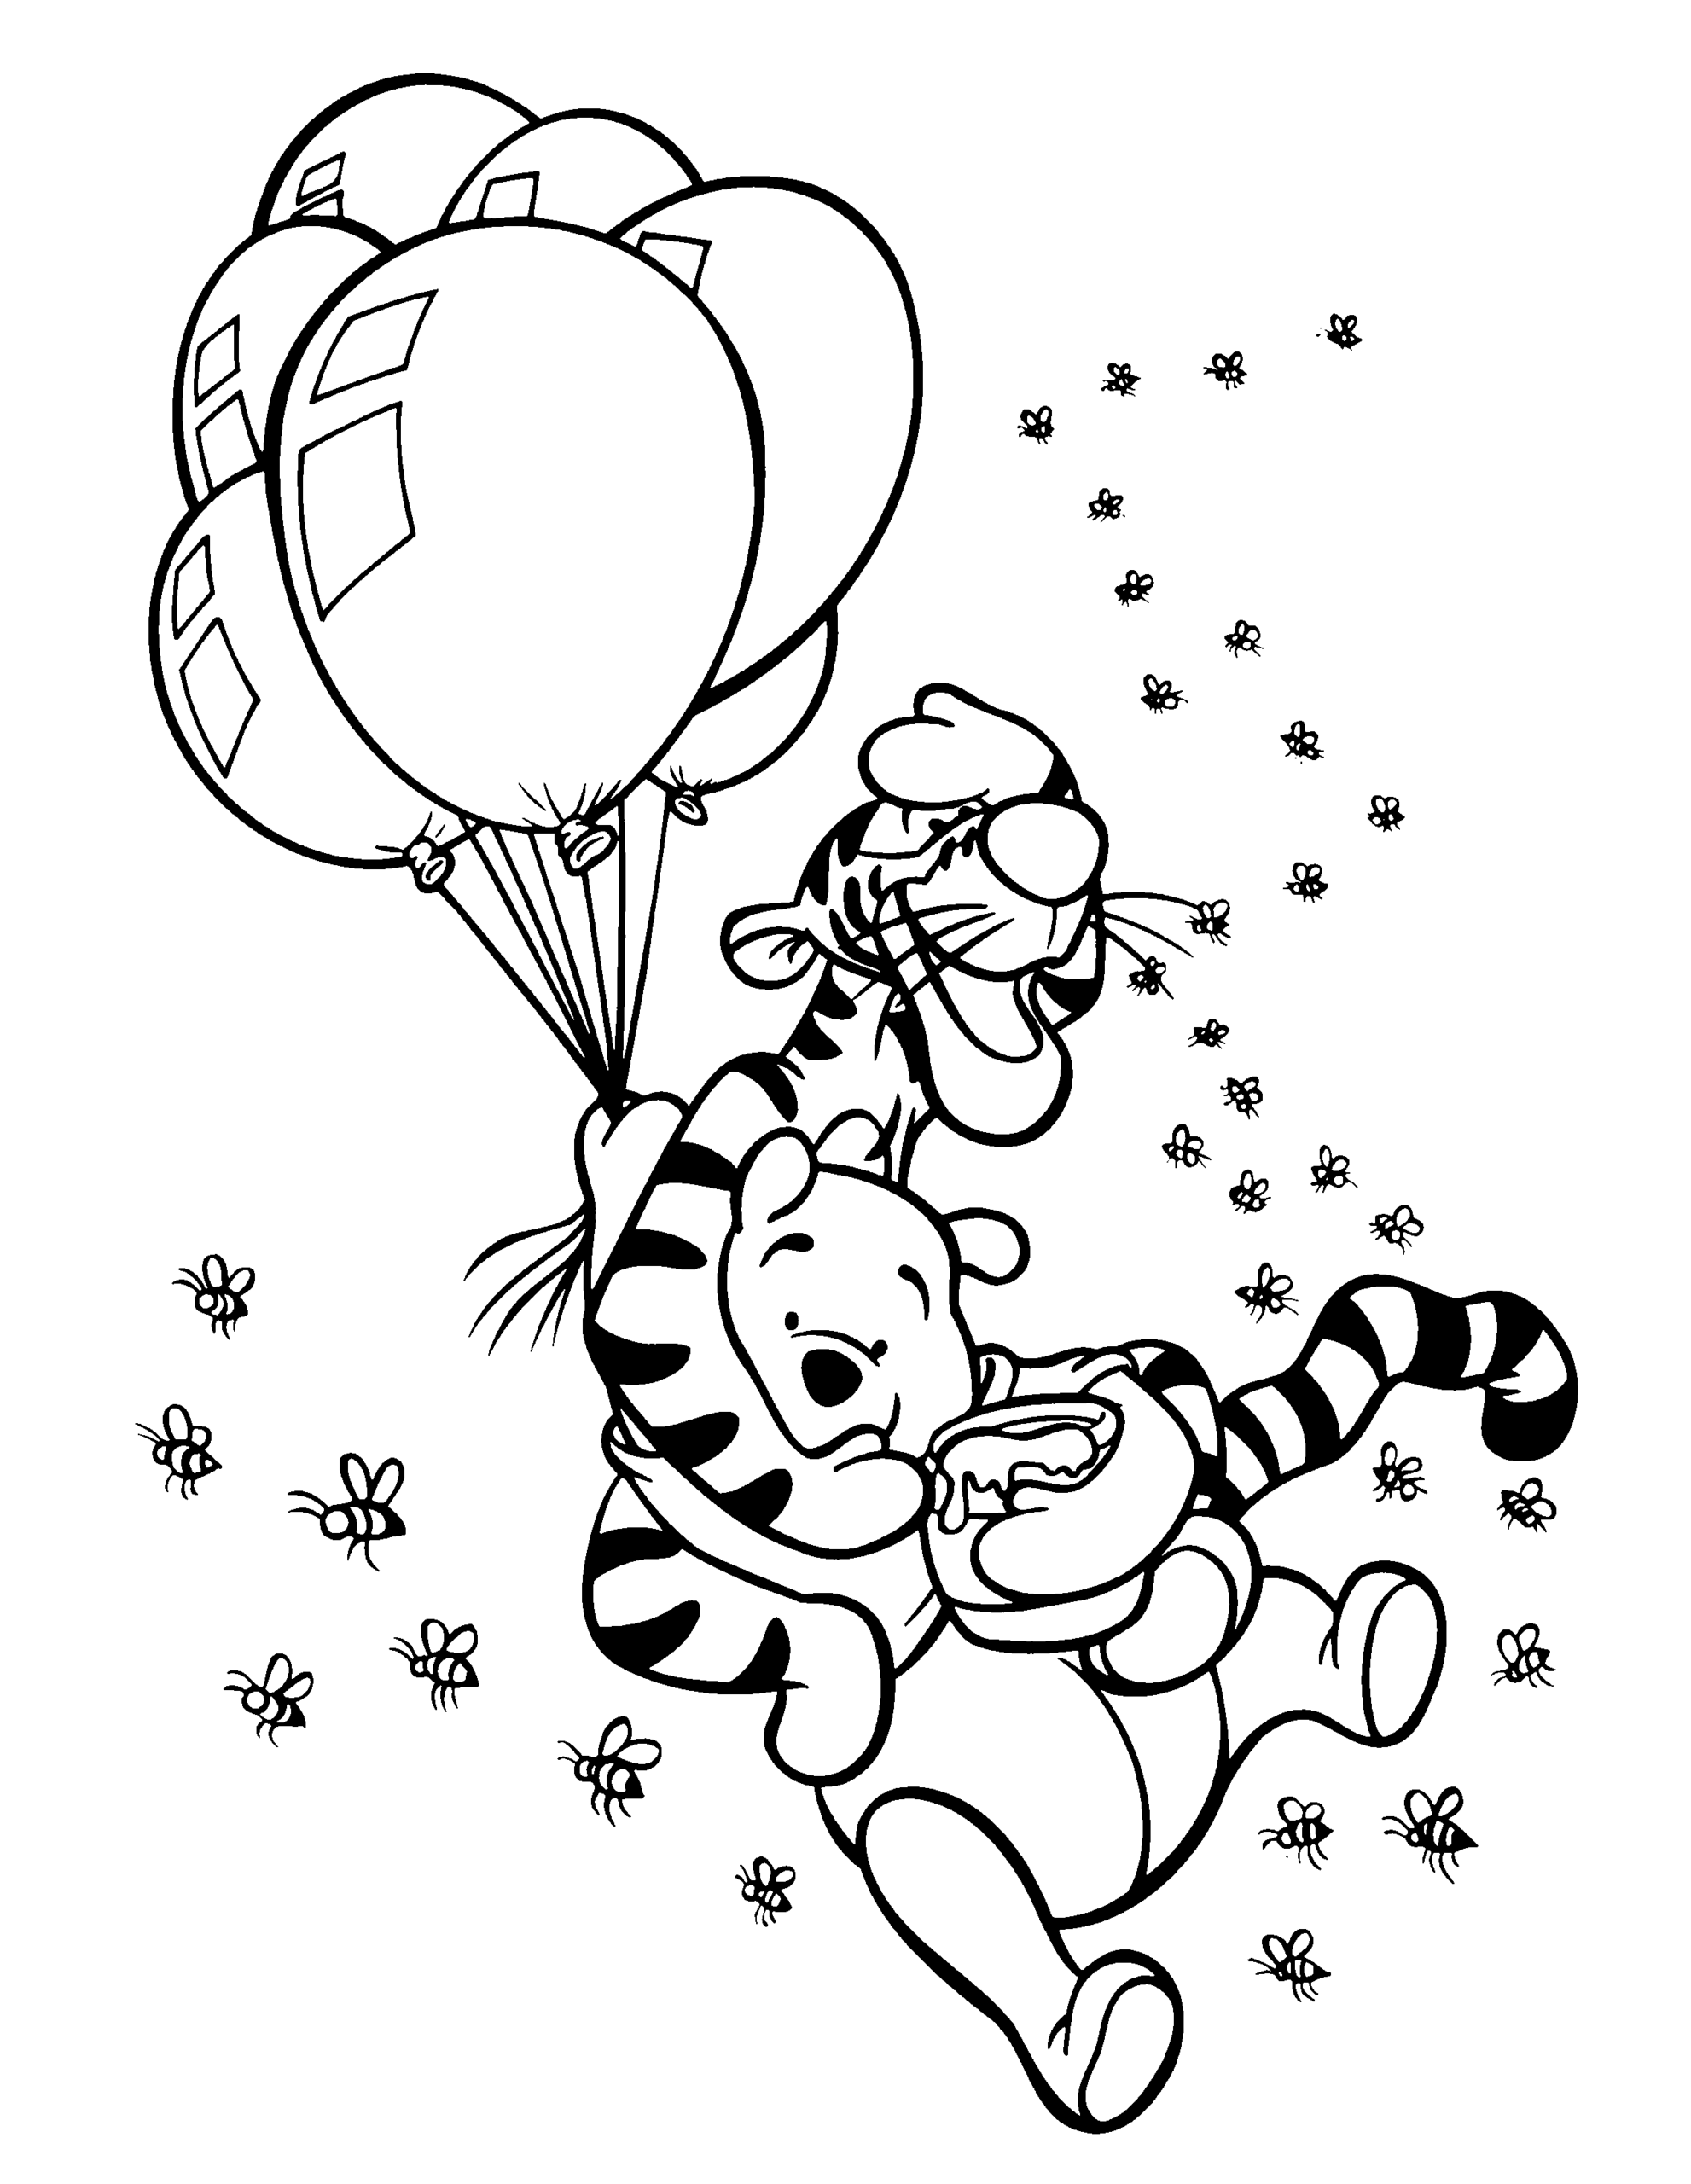 Winnie the Pooh Coloring Pages Cartoons winnie the pooh 61 Printable 2020 7178 Coloring4free